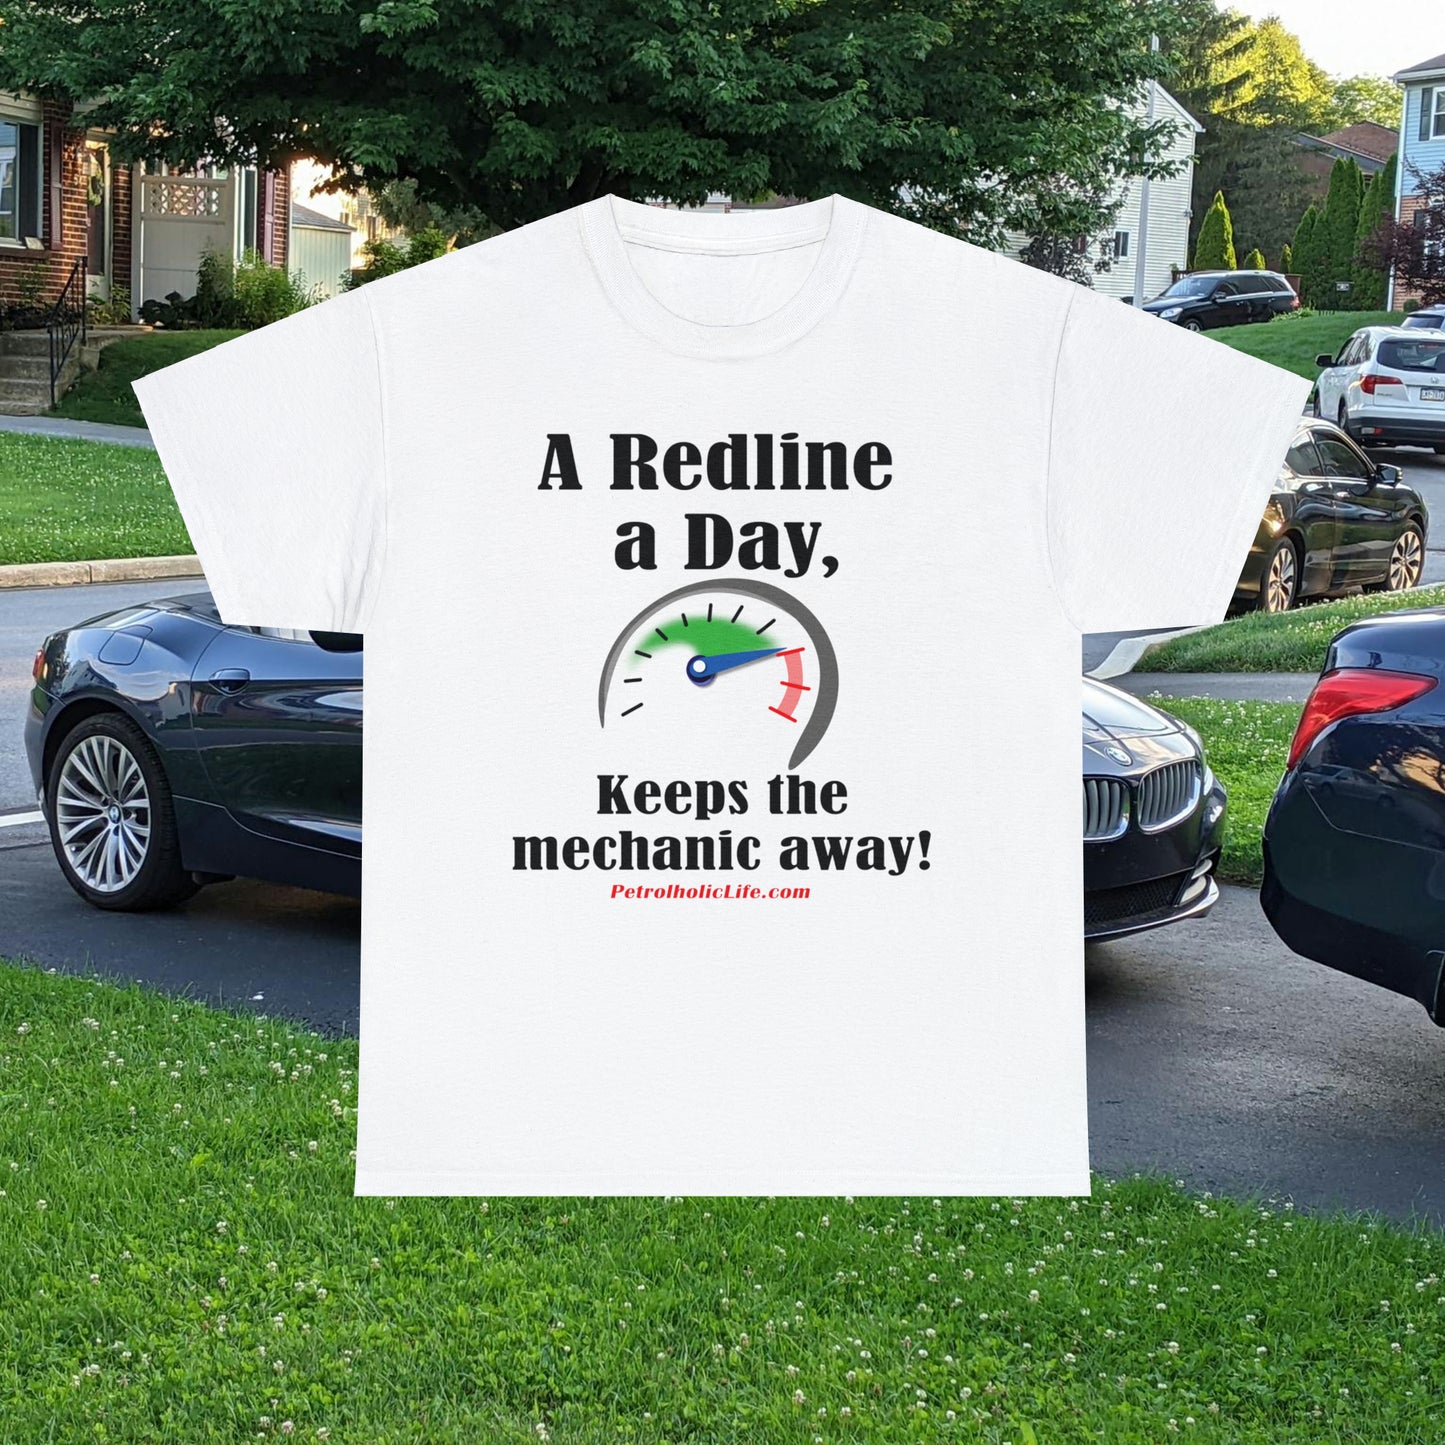 A Redline a Day Keeps the Mechanic Away - Unisex Heavy Cotton Tee